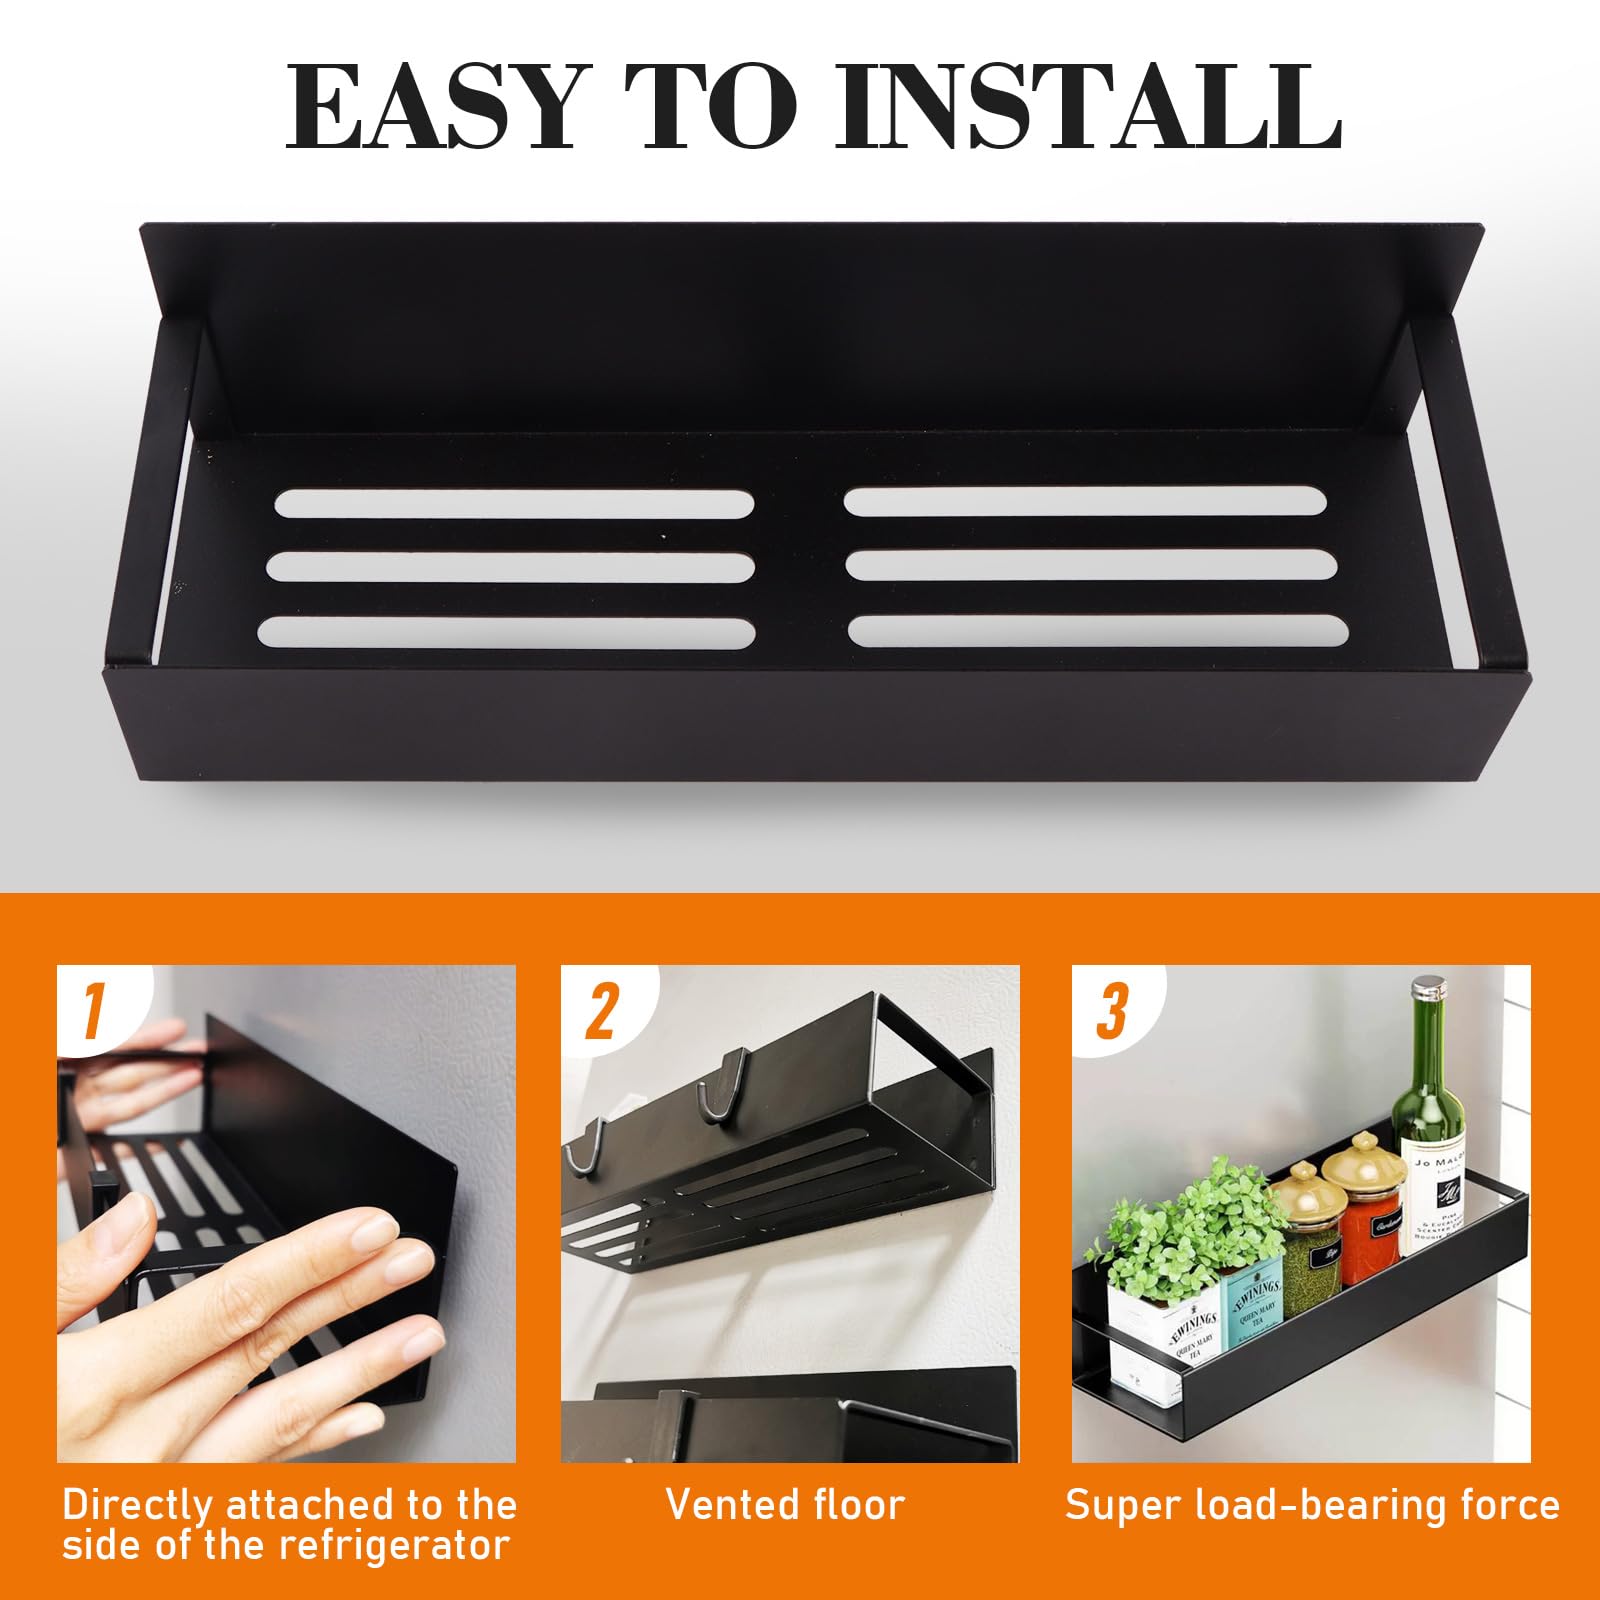 4 Pack Magnetic Shelf for Fridge, Magnetic Spice Rack for Refrigerator,Movable Spice Rack Organizer for Kitchen, Easy to Install, Waterproof and Rustproof ABS Material (BLACK 4 PACK)